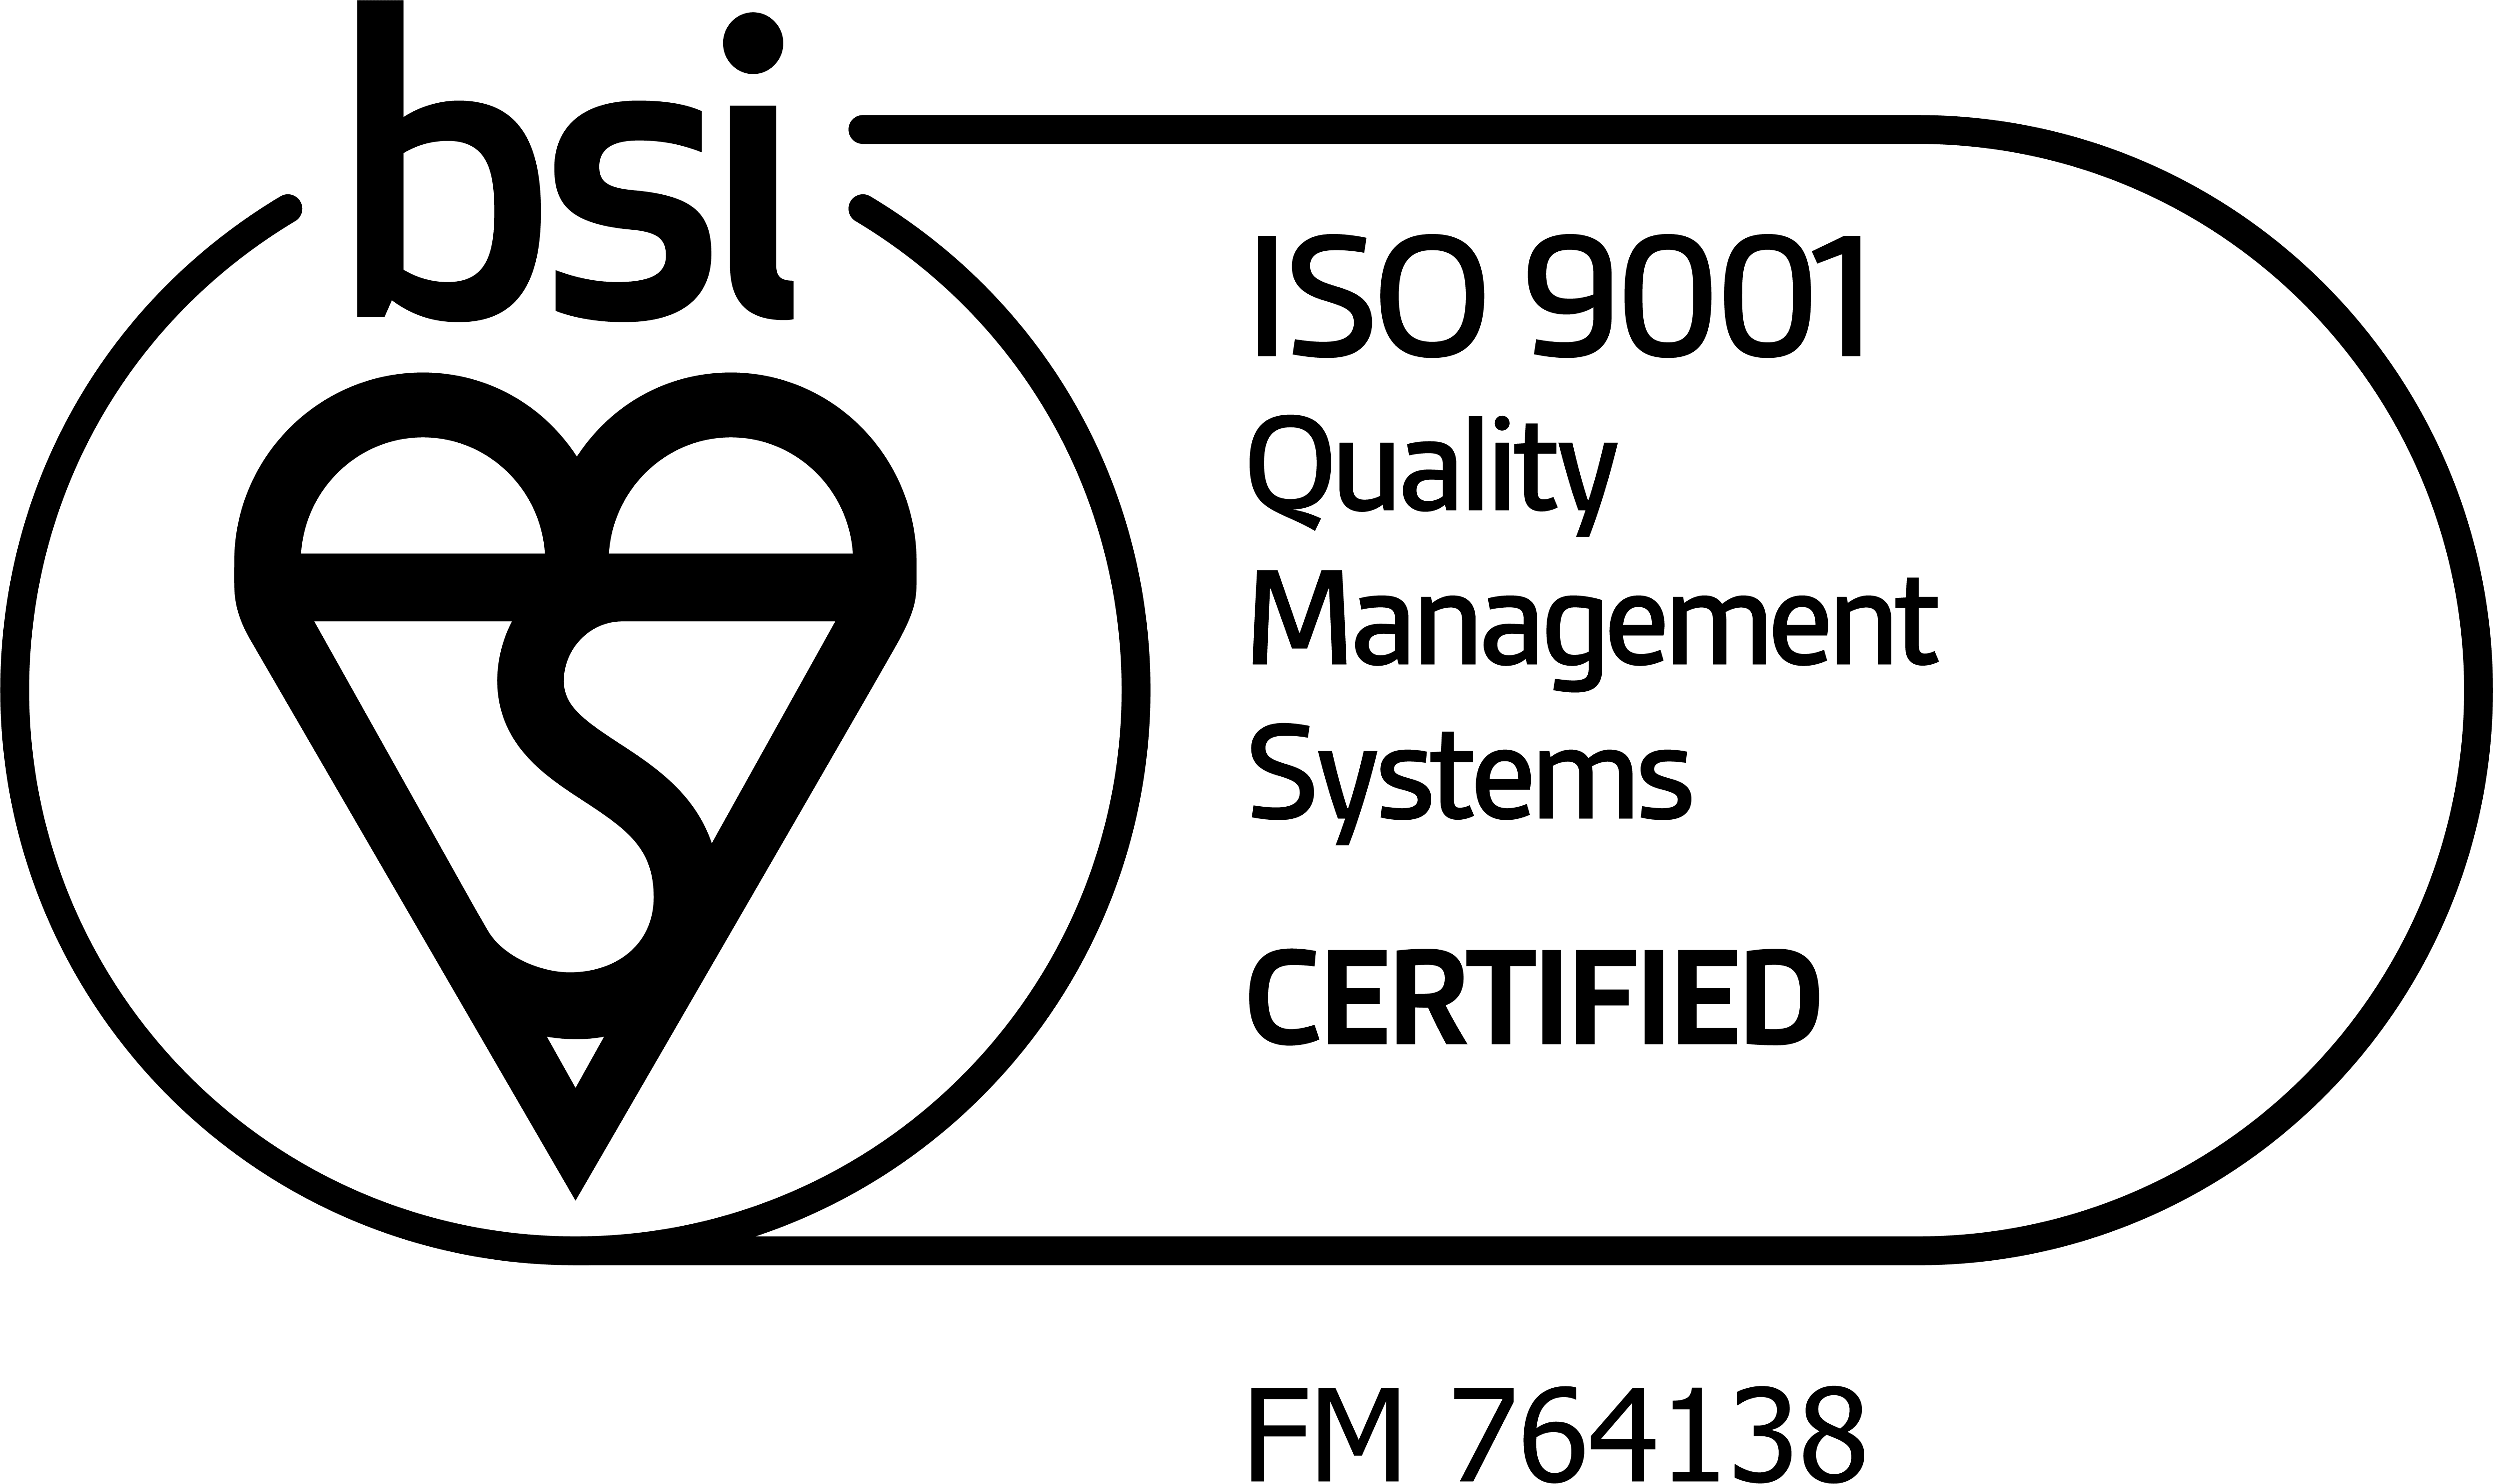 Corrosion Service Company Limited ISO 9001:2015 Certified